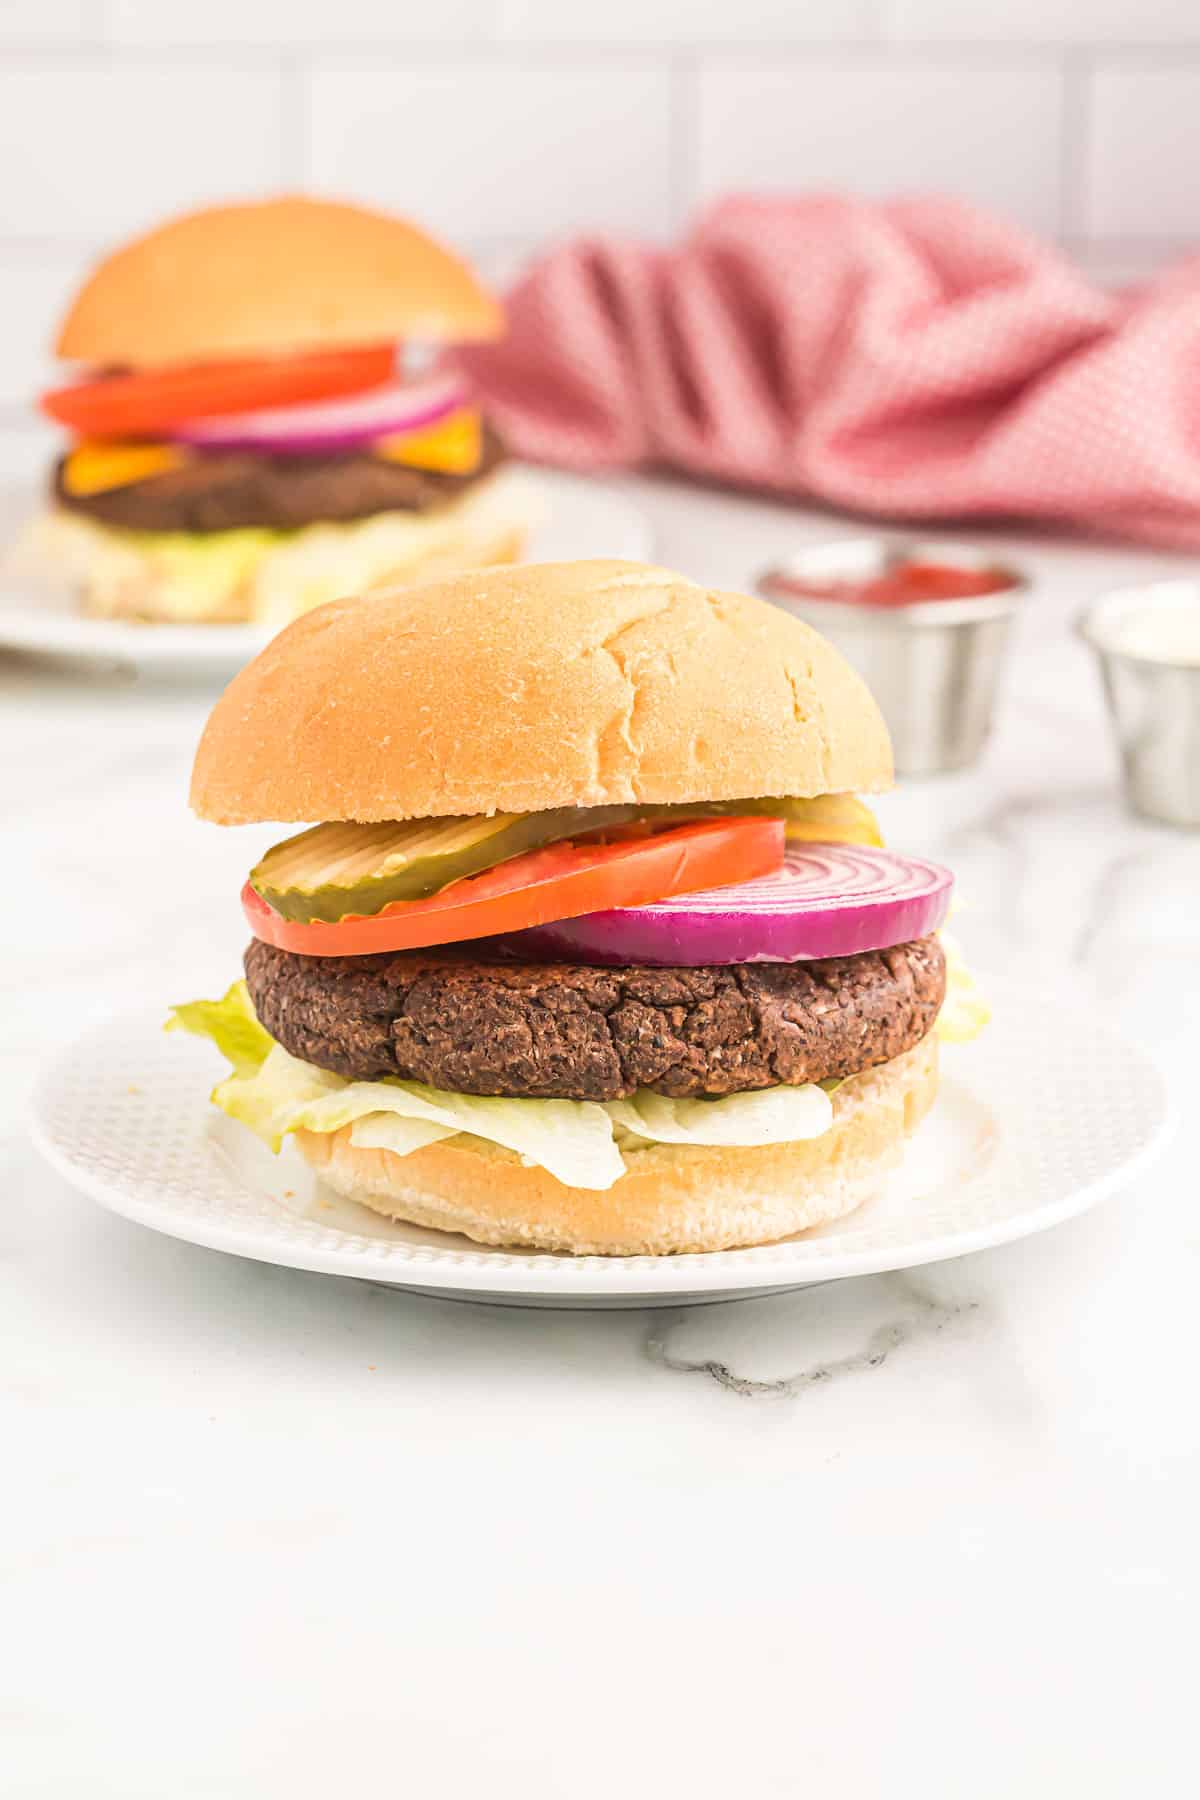 black bean burger on a bun with pickles, tomato, lettuce, and red onion